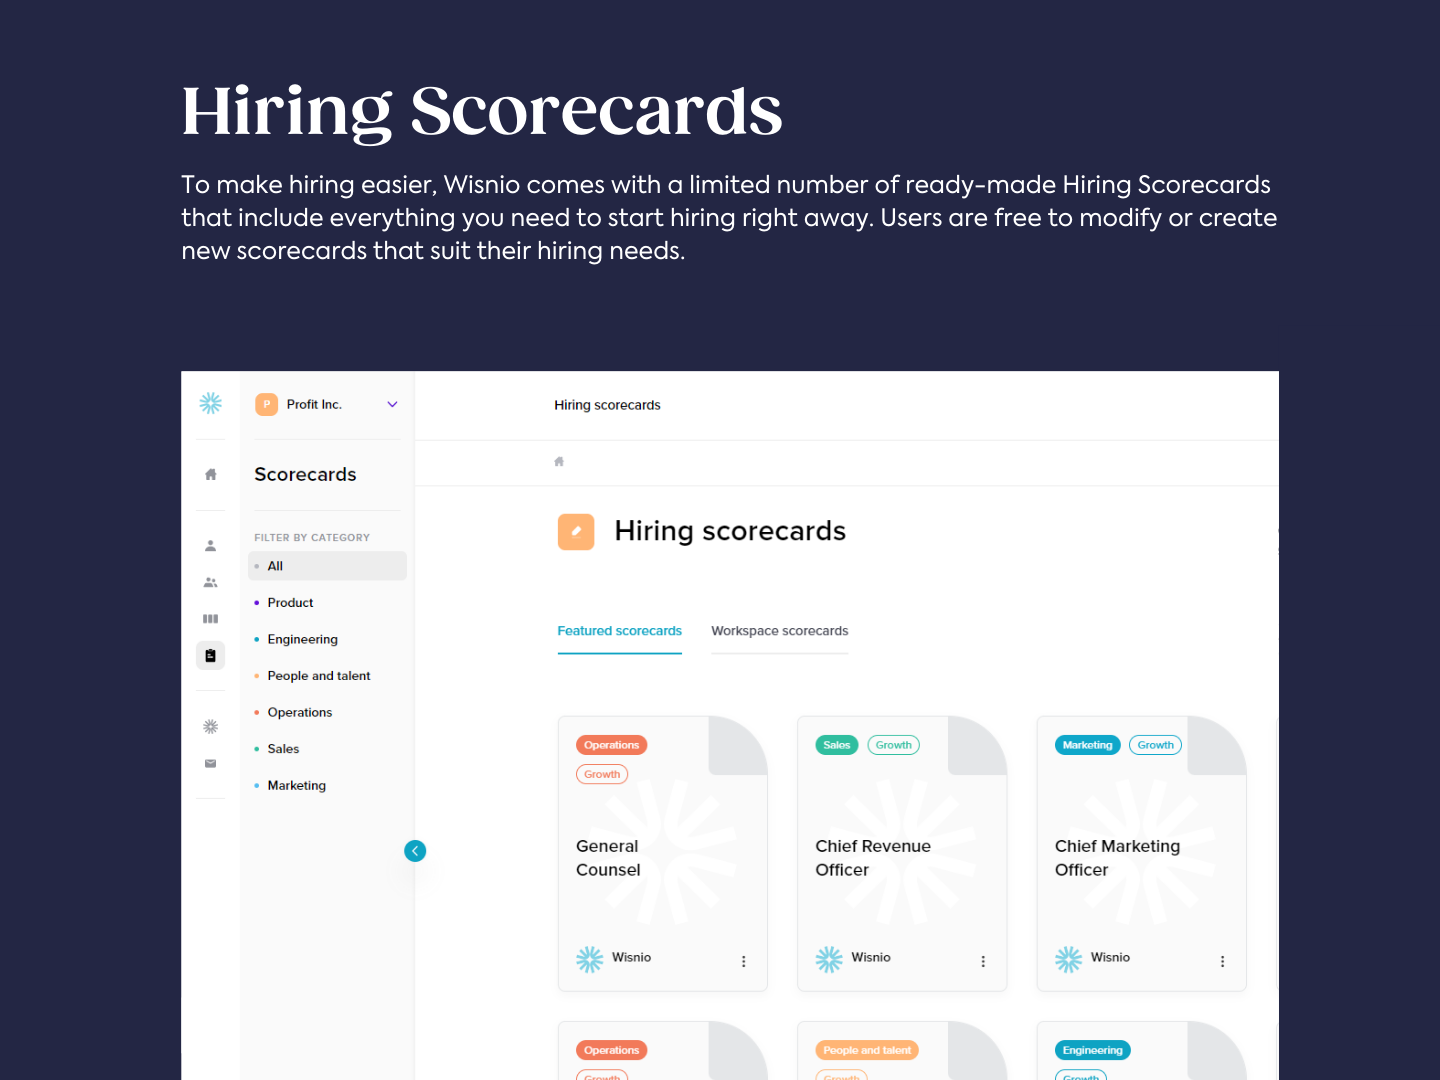 The Wisnio platform comes with a selection of ready-made hiring scorecards that include everything you need to start hiring already today!